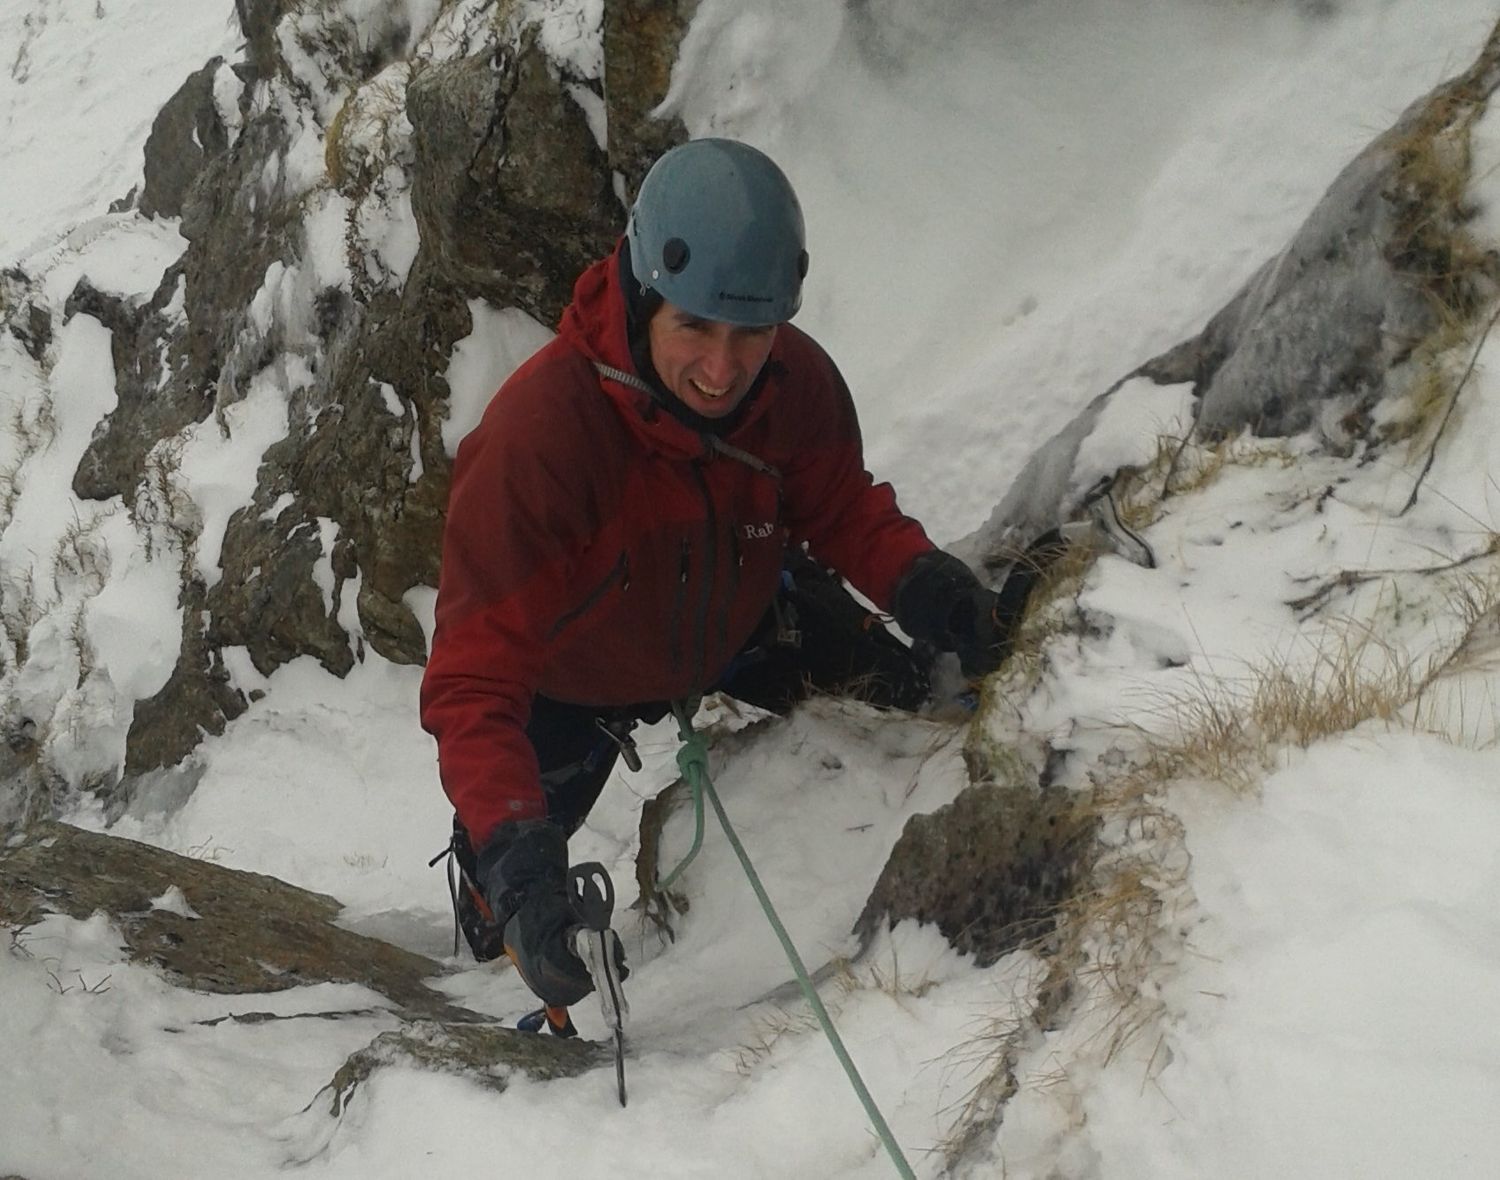  Climbing in the Lake District mountains in winter - Chris Ensoll Mountain Guide 